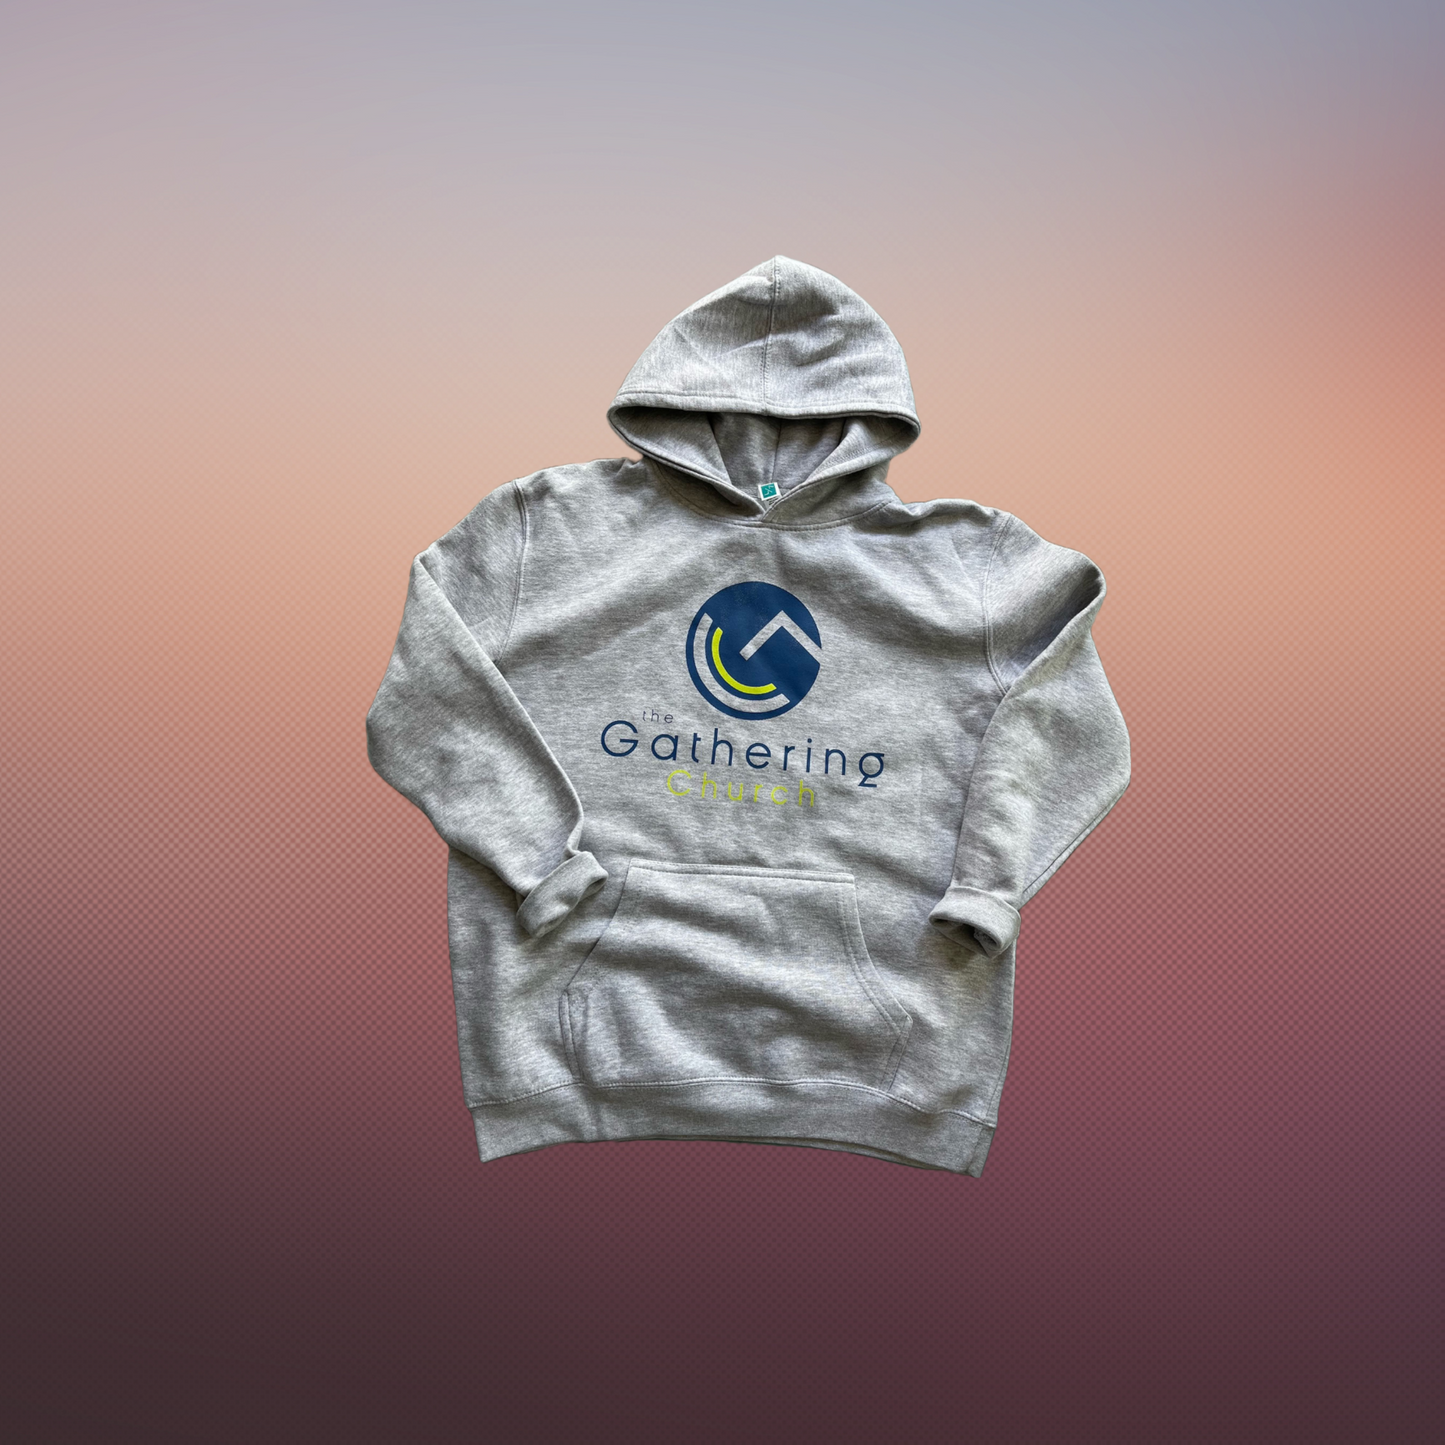 The Gathering Church Swag Hoodie